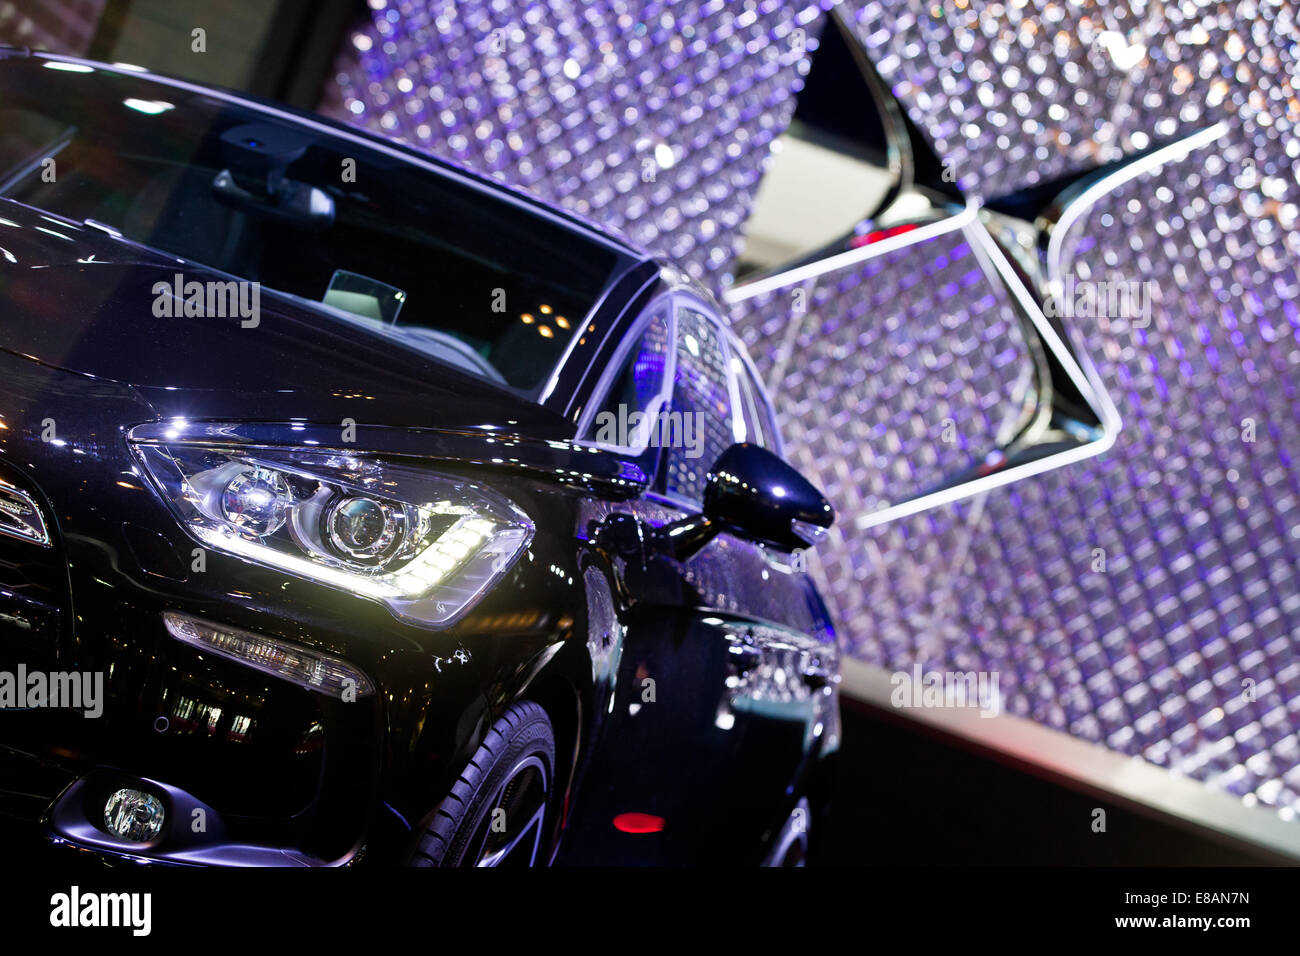 Paris, France. 3rd Oct, 2014. The DS5 of Citroen is pictured infront of the DS logo during the second press day of the Paris Motor Show (Mondial de l'Automobile) in Paris, France, 3 October 2014. The Paris Motor Show, which takes place every other year, runs from 4 until 19 October. Photo: Daniel Karmann/dpa/Alamy Live News Stock Photo